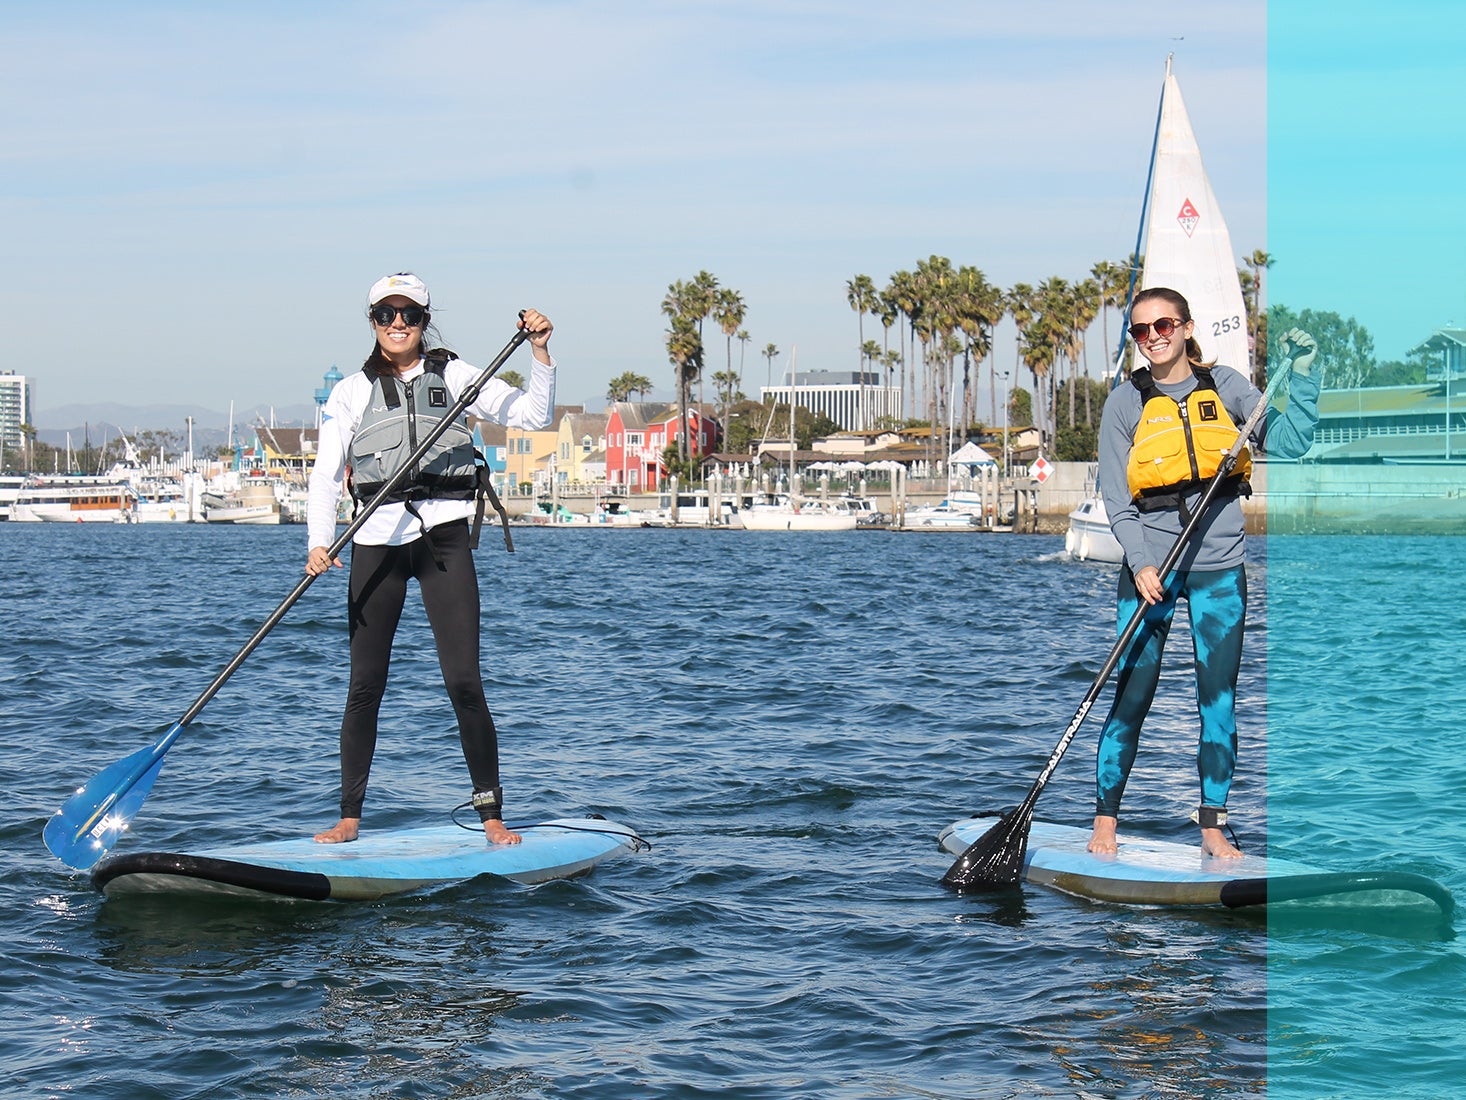 Two students work on their paddle boarding skills at the Marina.